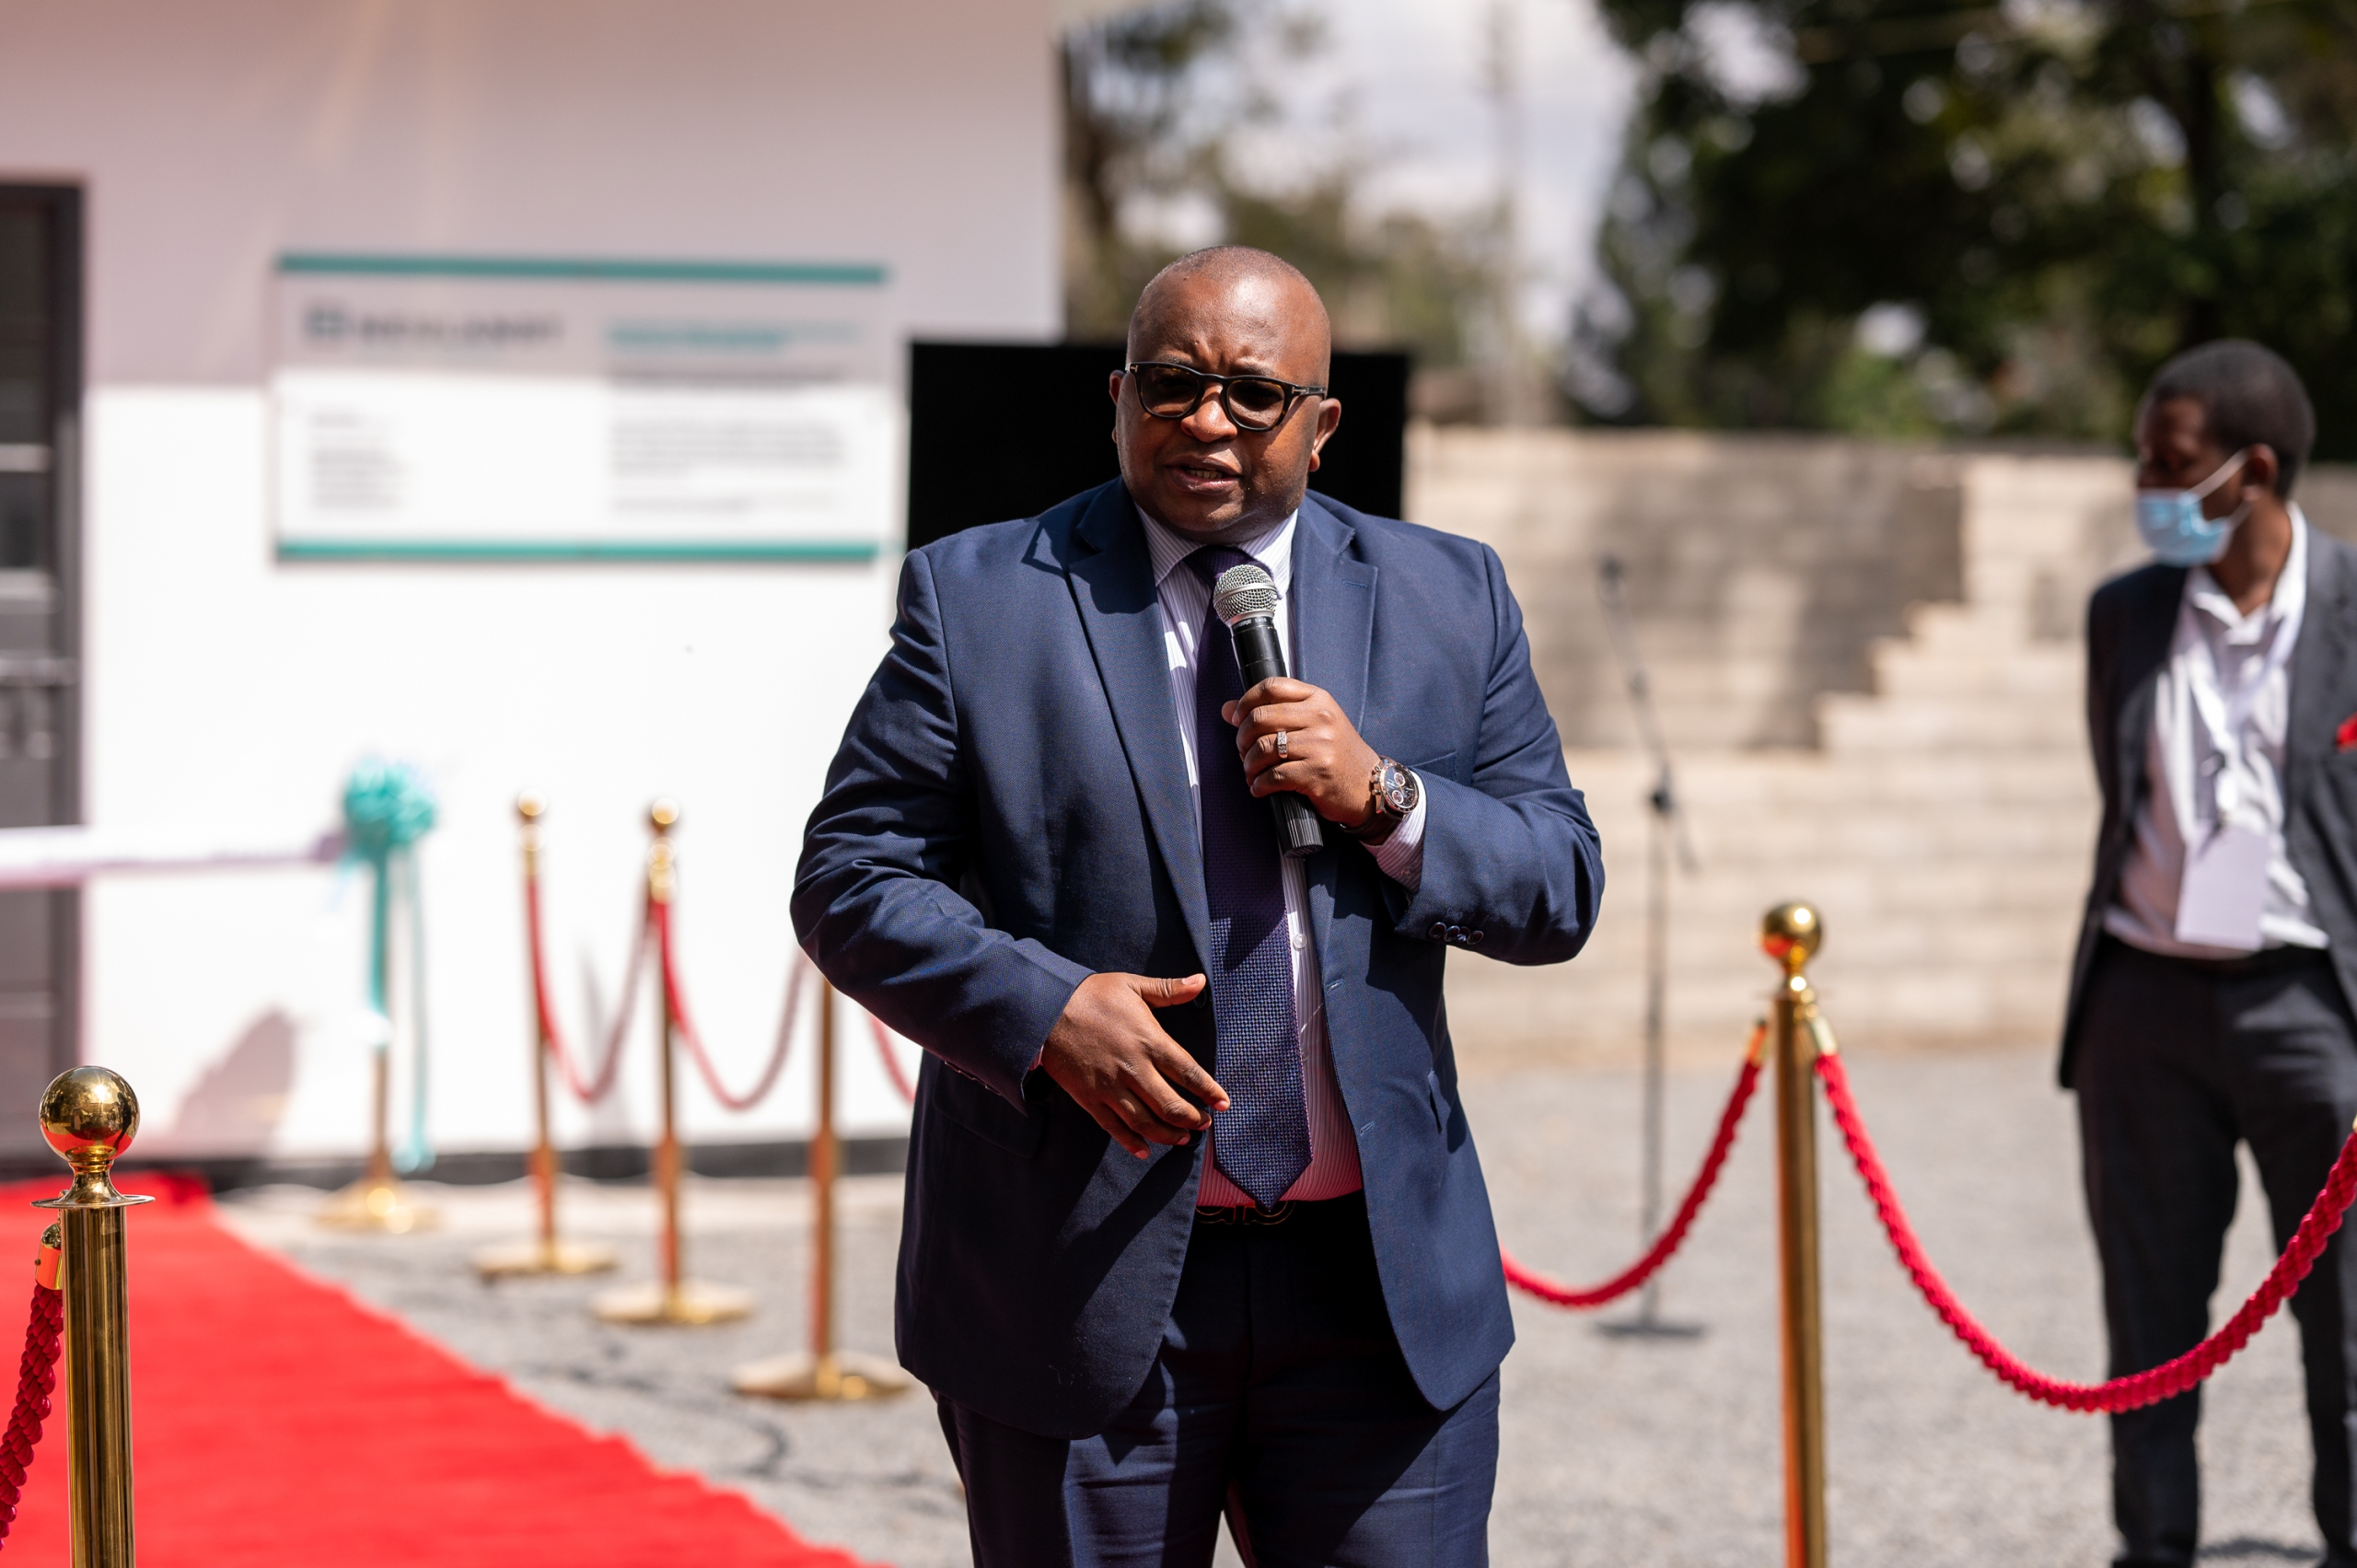 Business man is giving a speech while holding a microphone on the red carpet right in front of the show house at the NCA show ground in Kenia